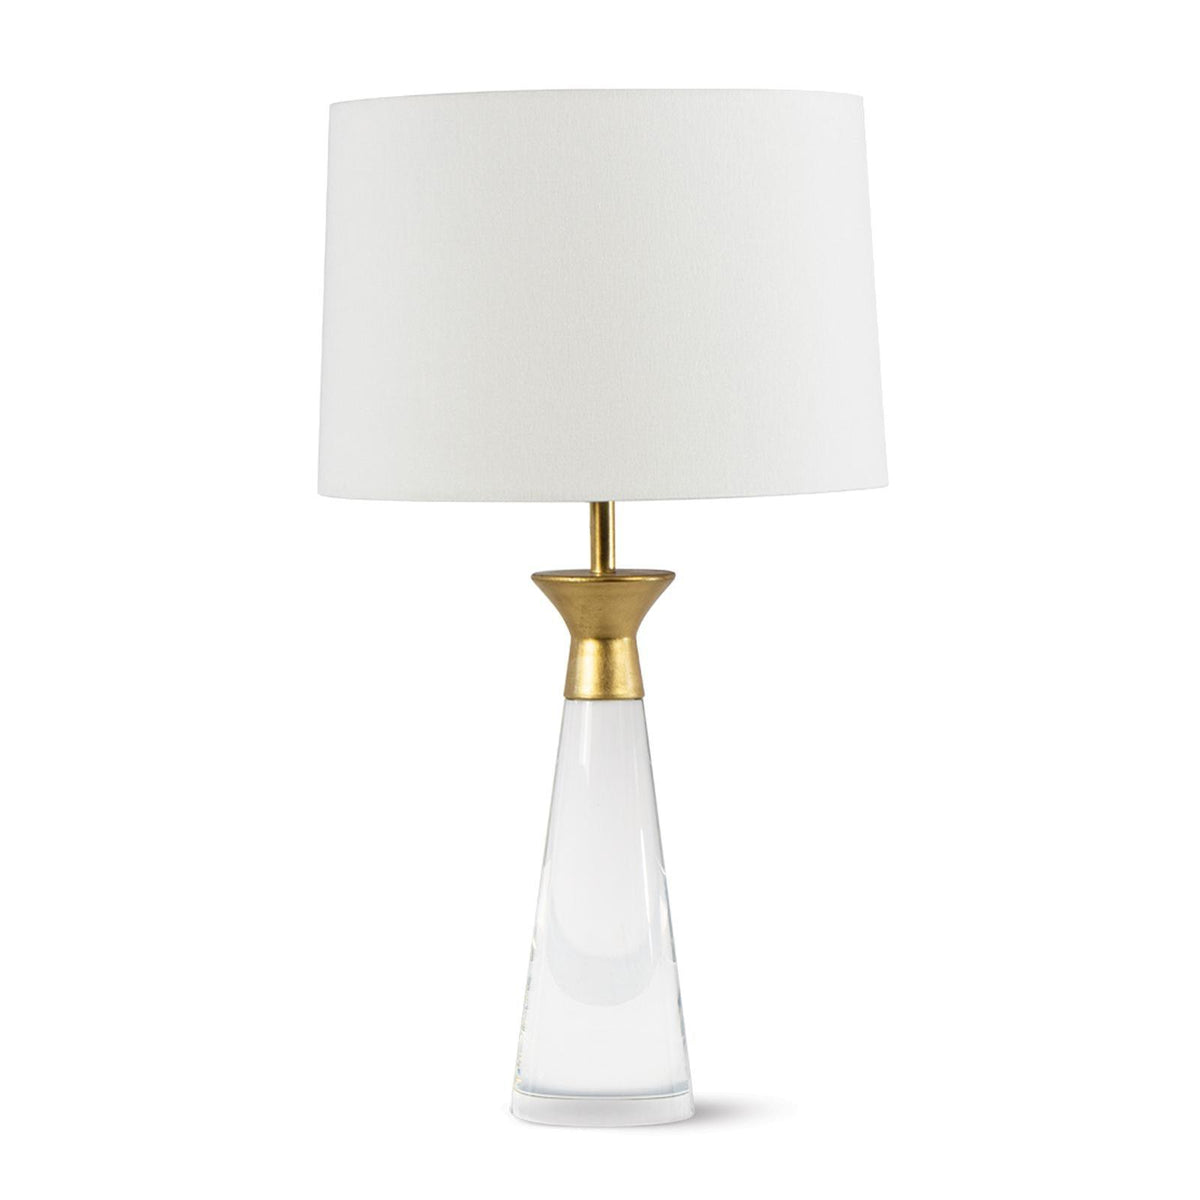 Regina Andrew - Southern Living Starling Crystal Table Lamp - 13-1486 | Montreal Lighting & Hardware